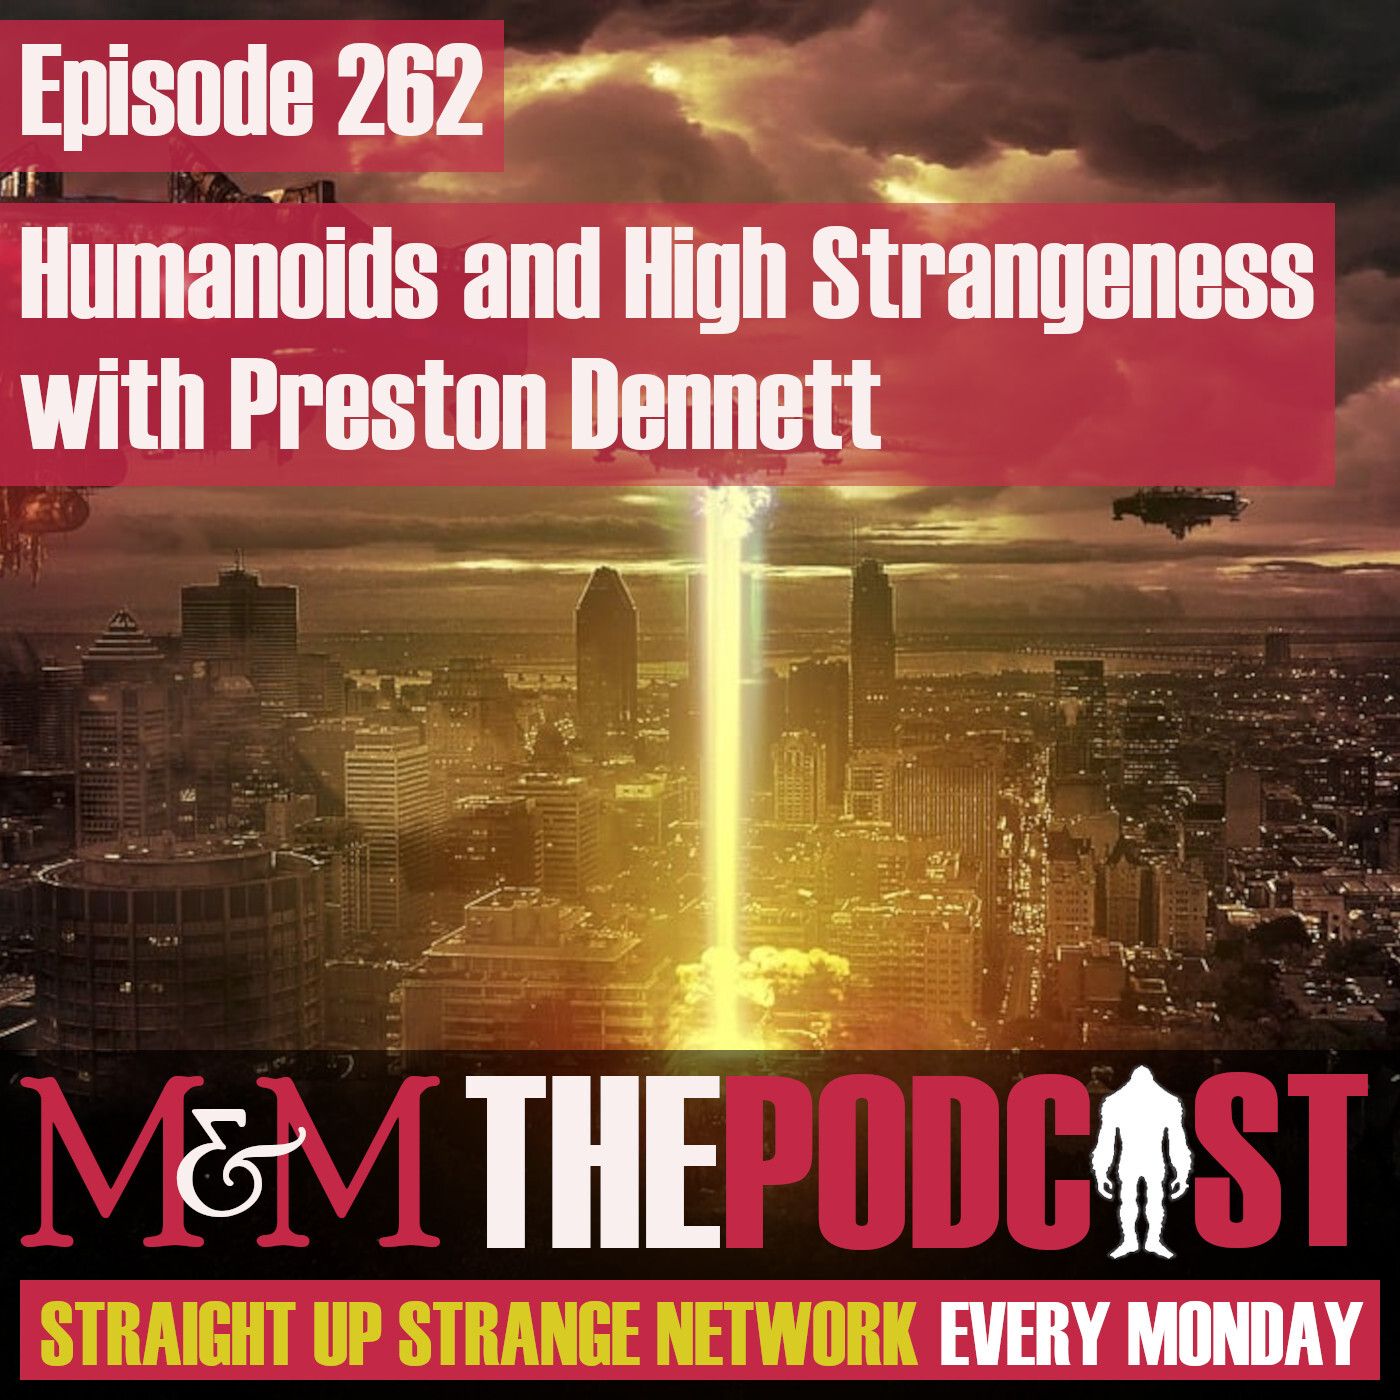 Mysteries and Monsters: Episode 262 Humanoids and High Strangeness with Preston Dennett